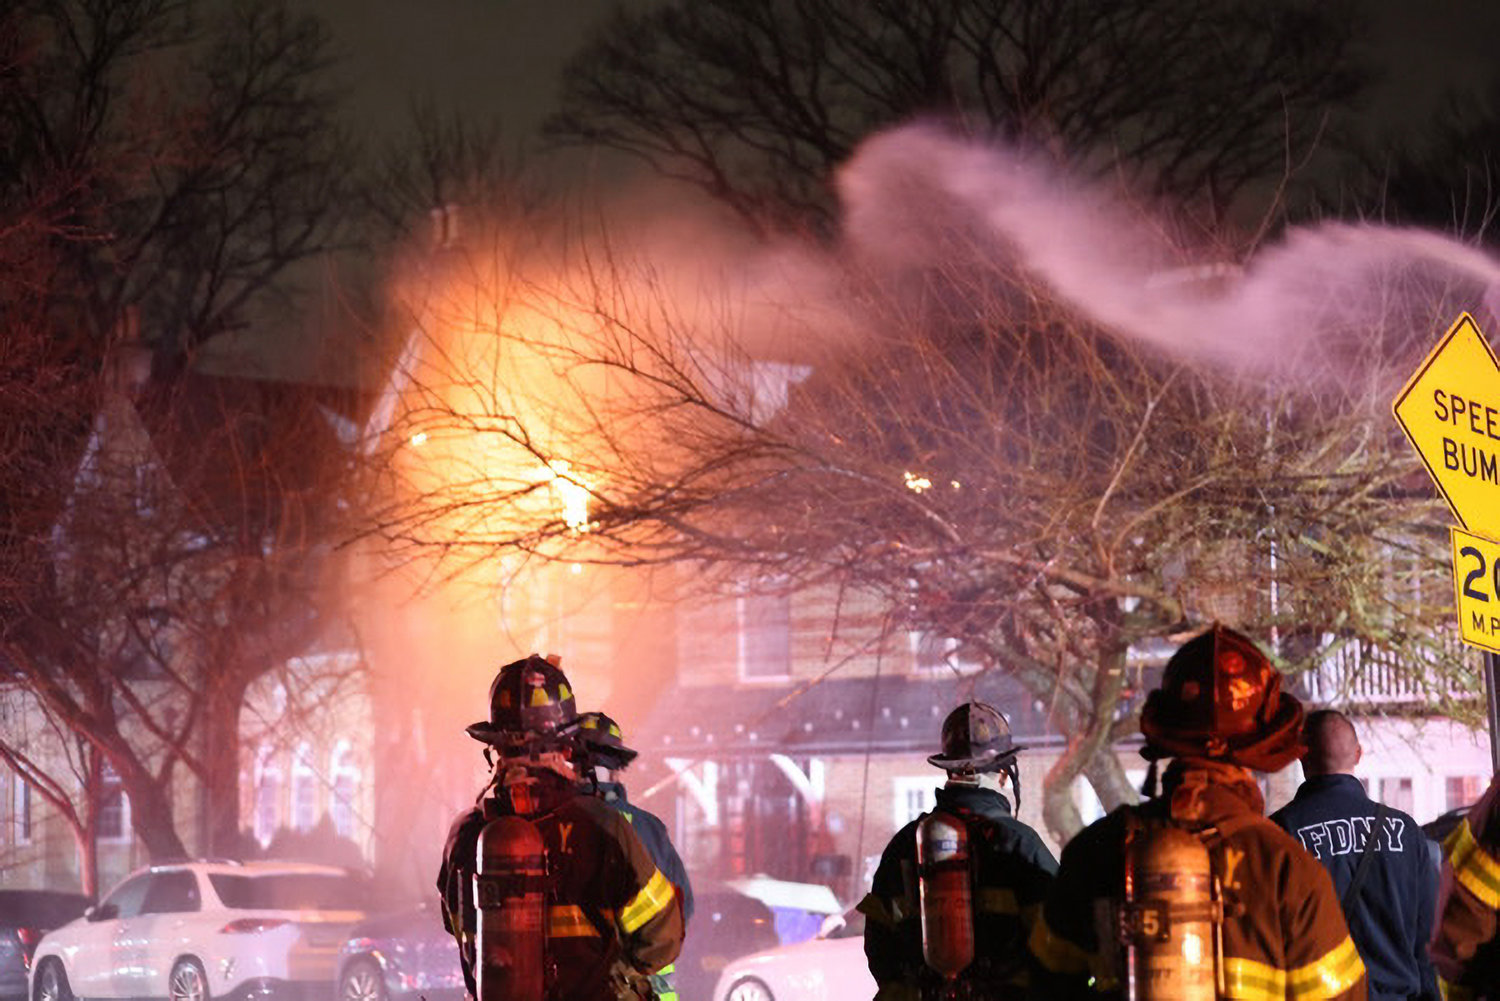 Firefighters work to put out an electrical fire Monday night, Feb. 20 on Fieldston Road. Two homes were evacuated, and 142 ConEd customers lost power before firefighters got the blaze under control at 11:12 p.m.